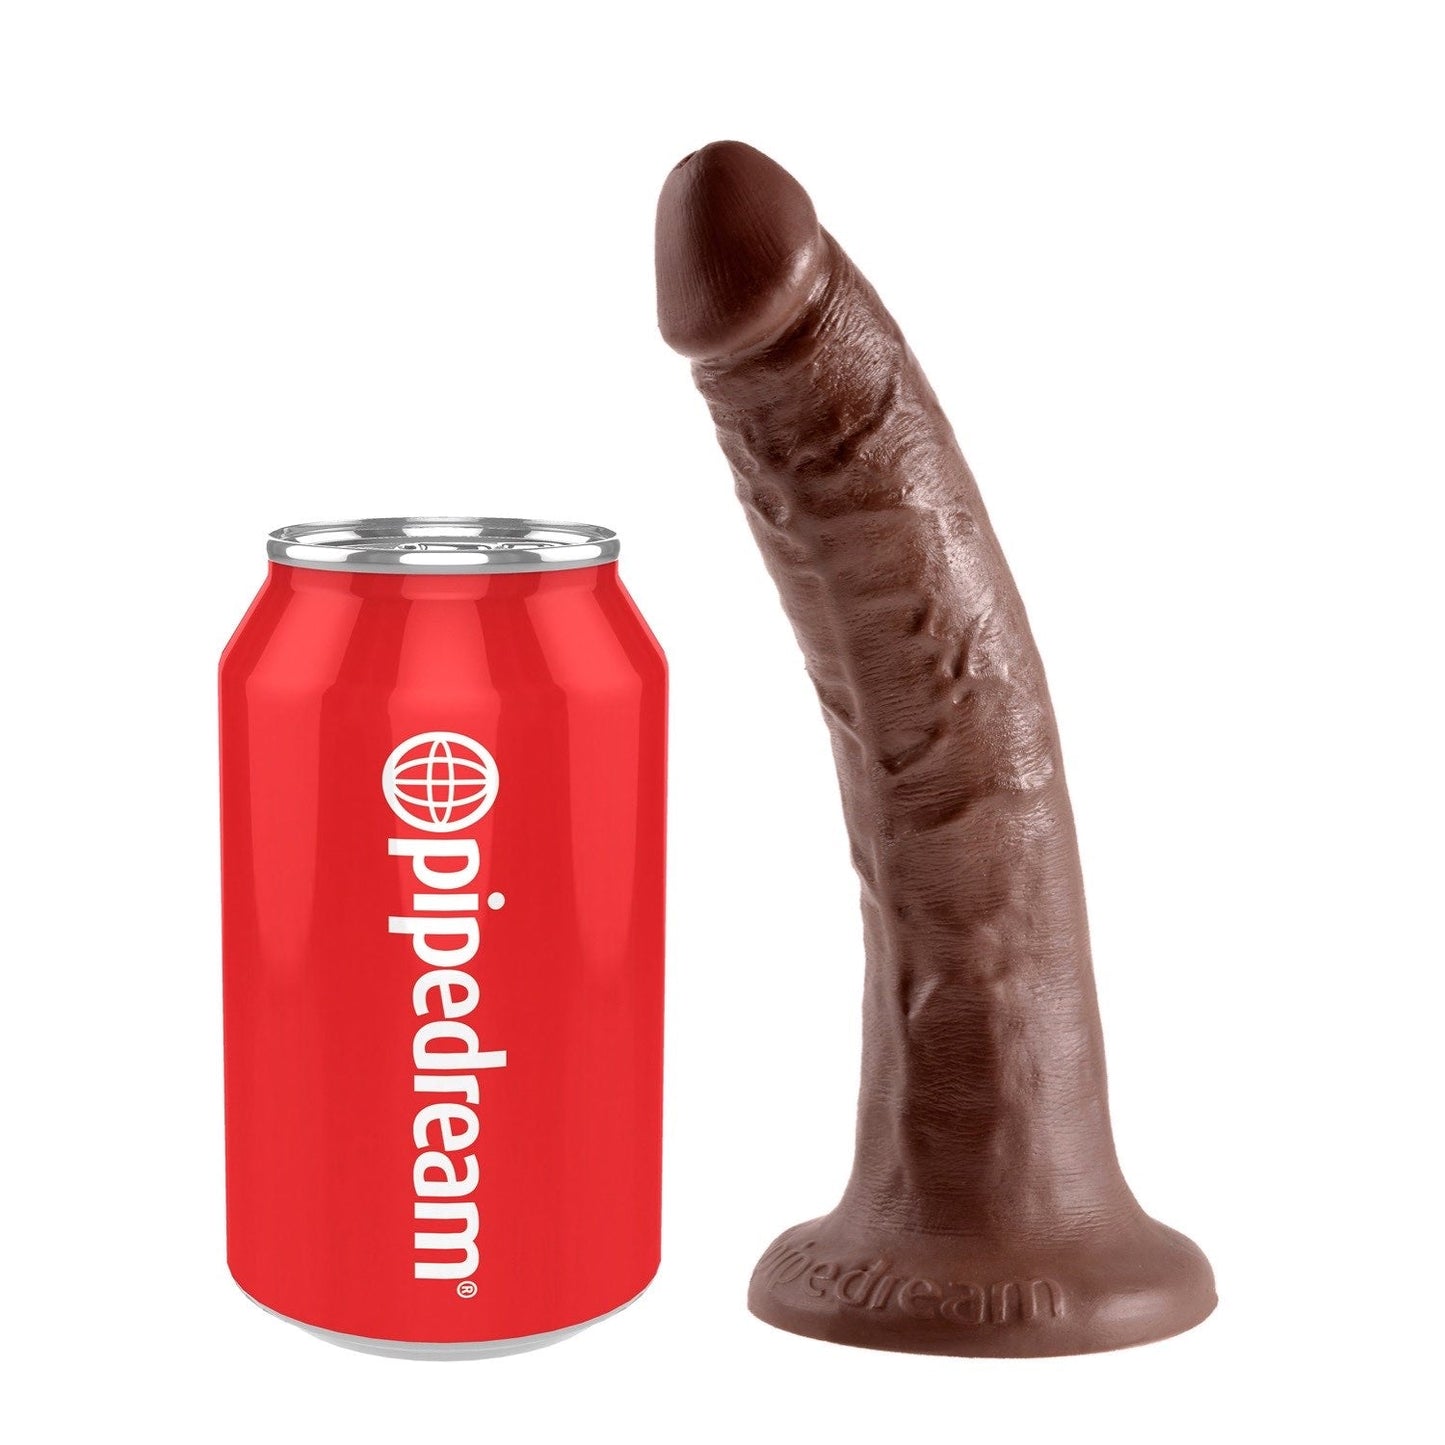 7" Cock - Brown 17.8 cm (7") Dong